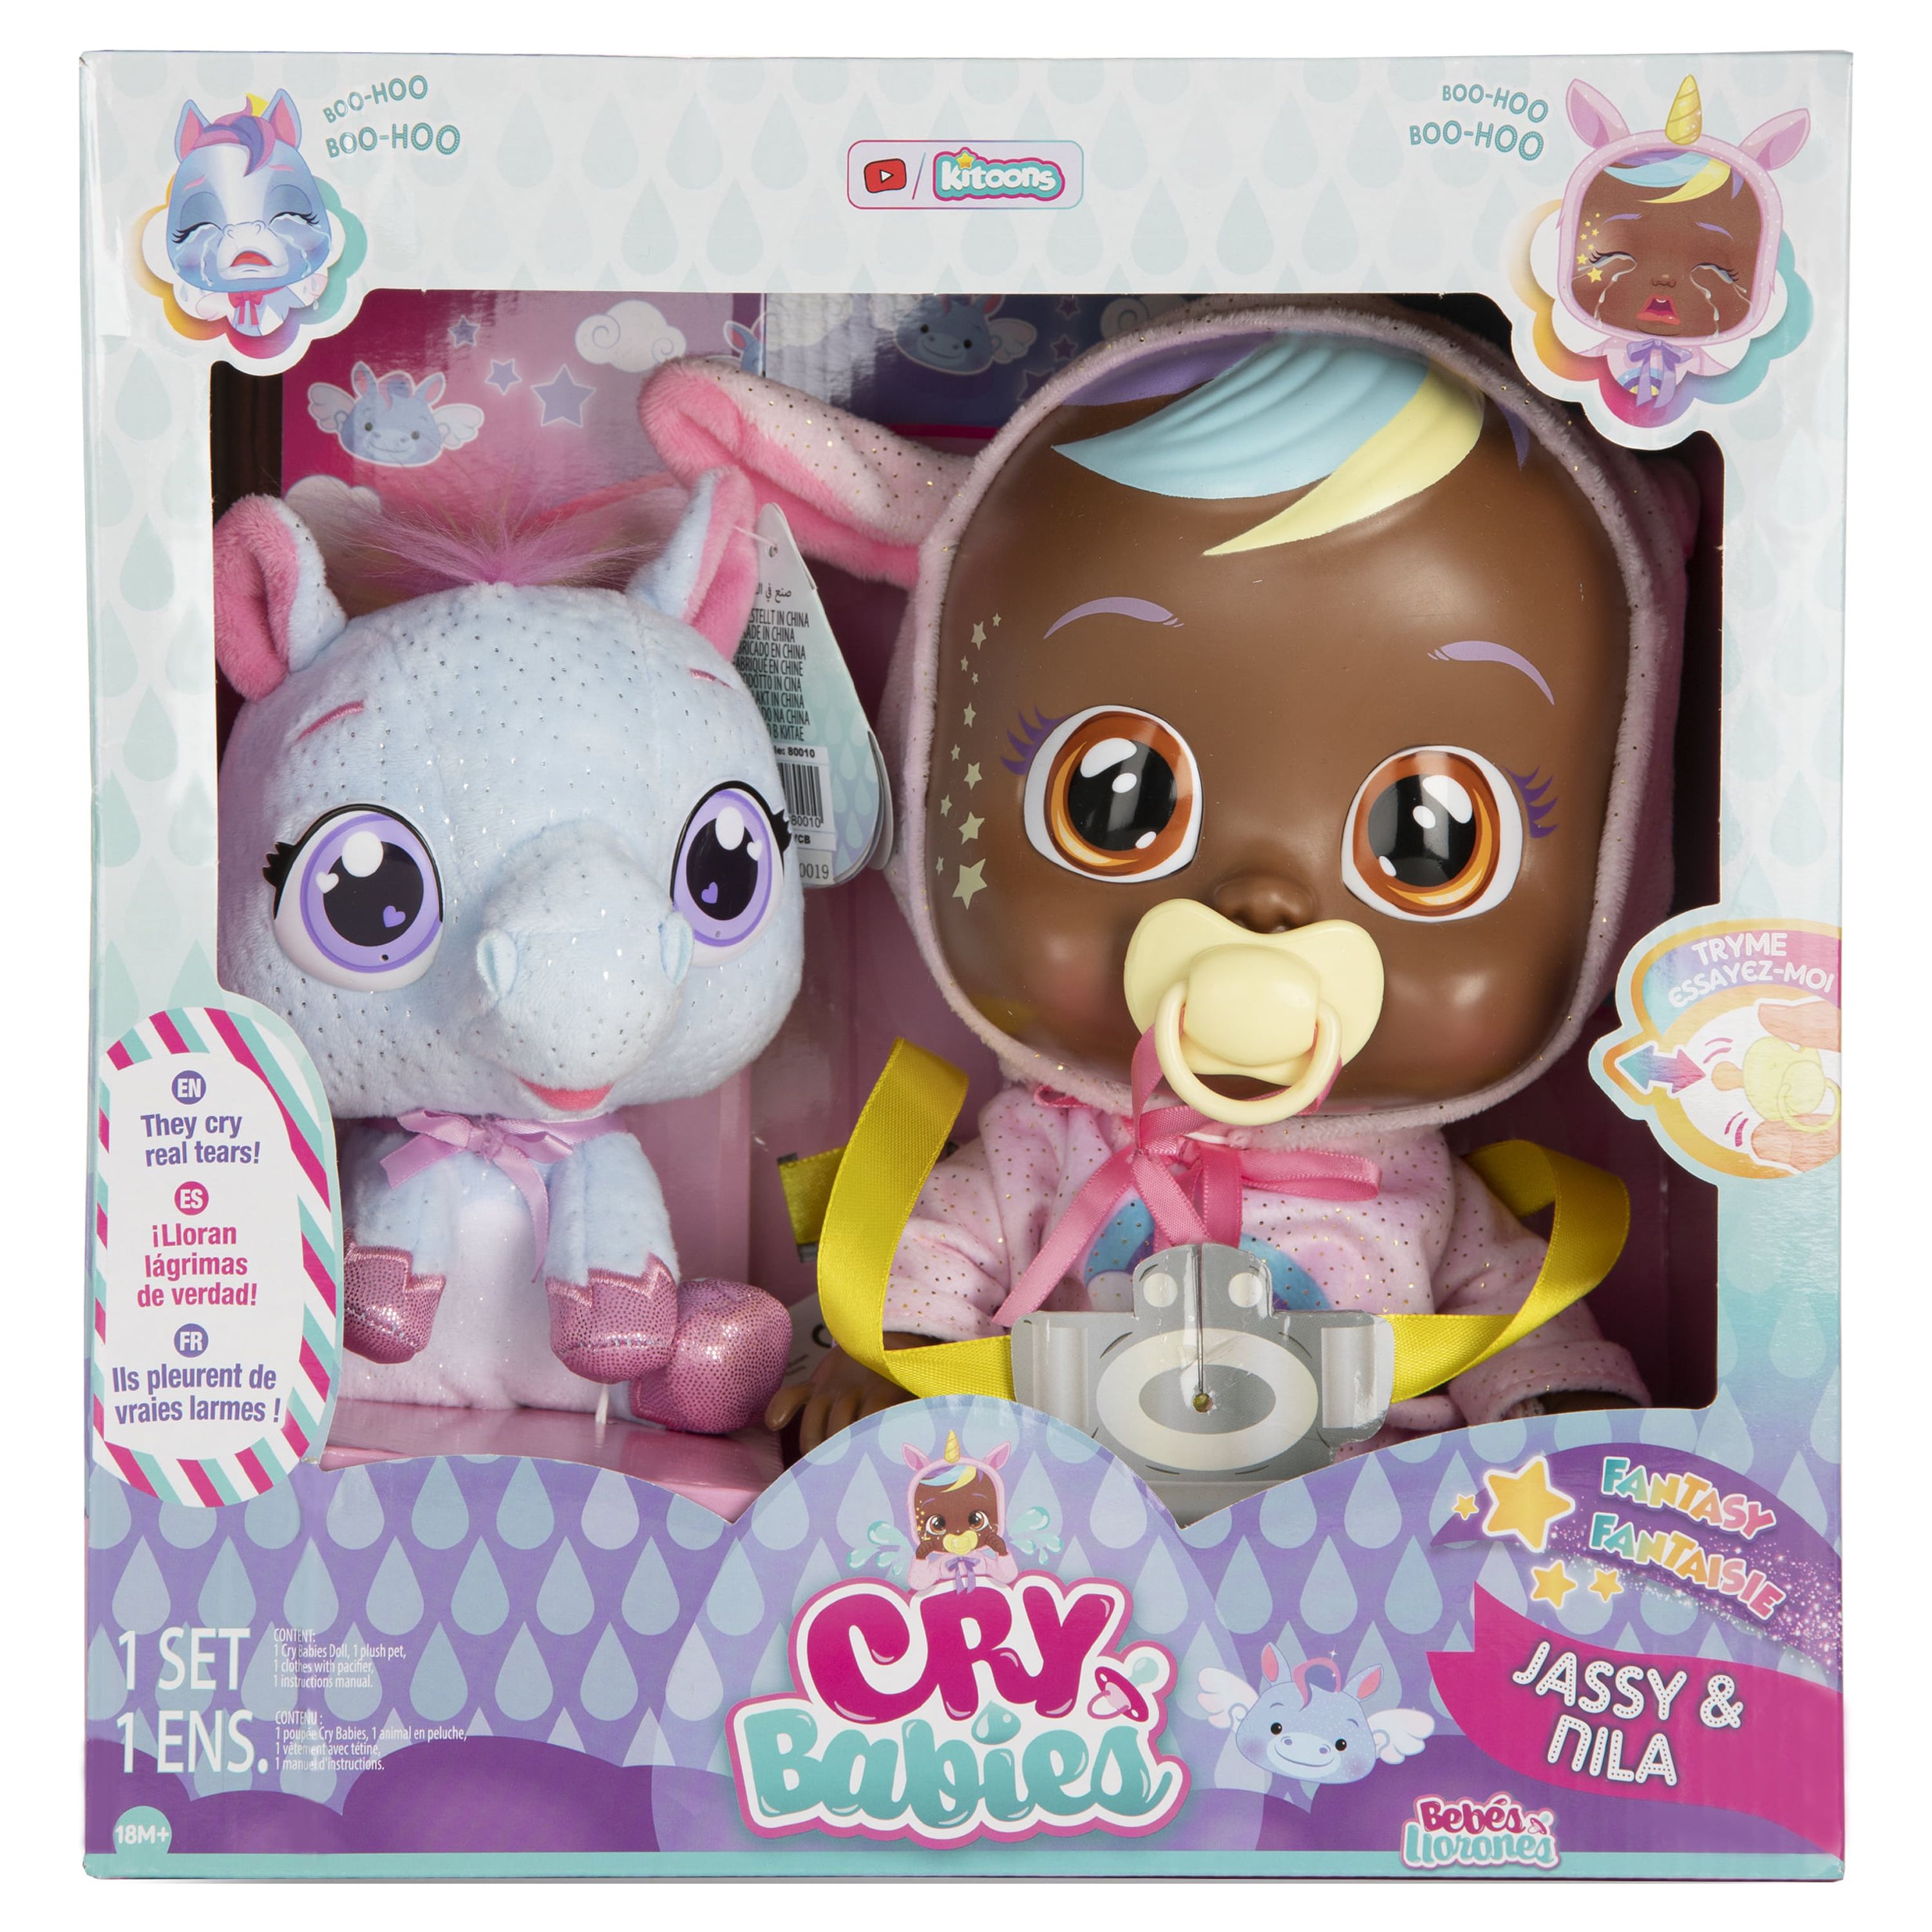 Cry Babies Fantasy Jassy and Nila Doll Playset, 3 Pieces - image 2 of 6